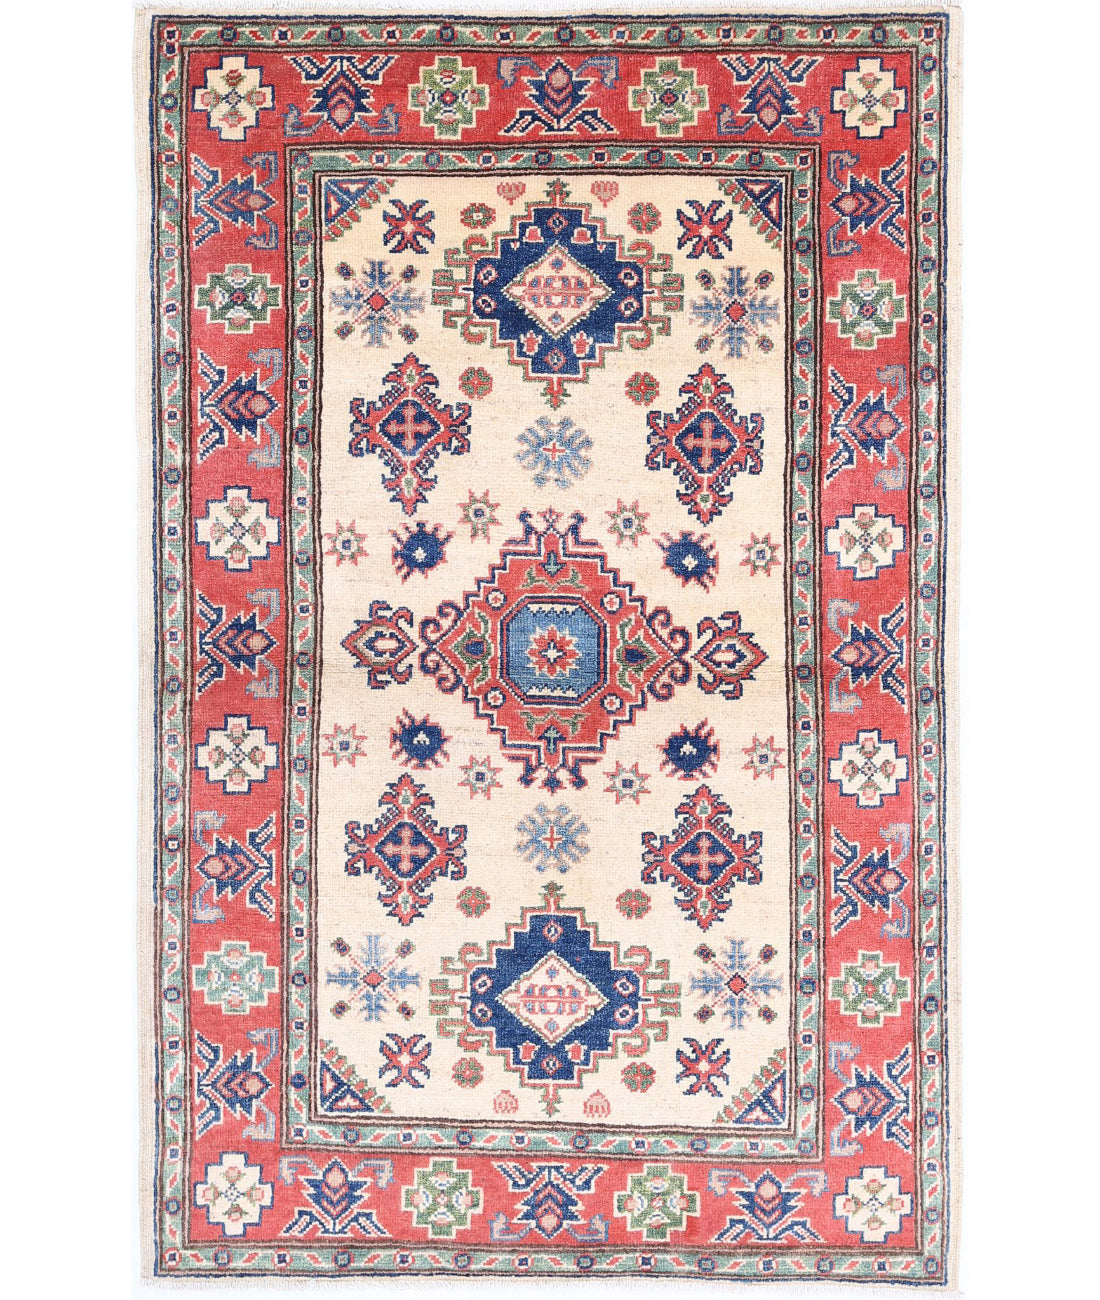 Hand Knotted Tribal Kazak Wool Rug - 3'1'' x 4'10'' 3'1'' x 4'10'' (93 X 145) / Ivory / Red